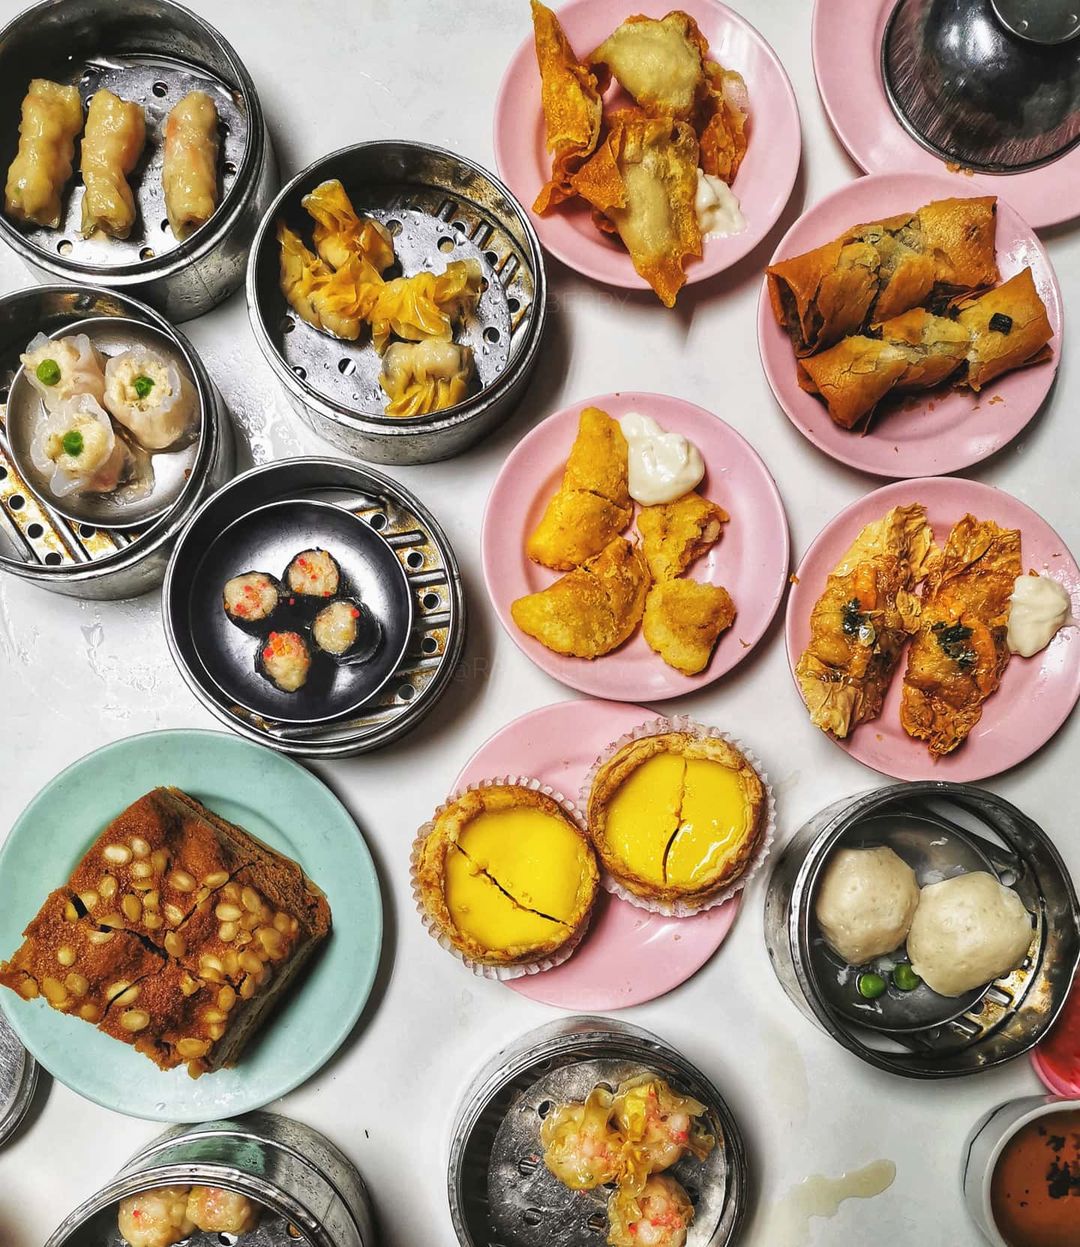 19 Places To Eat At In Ipoh